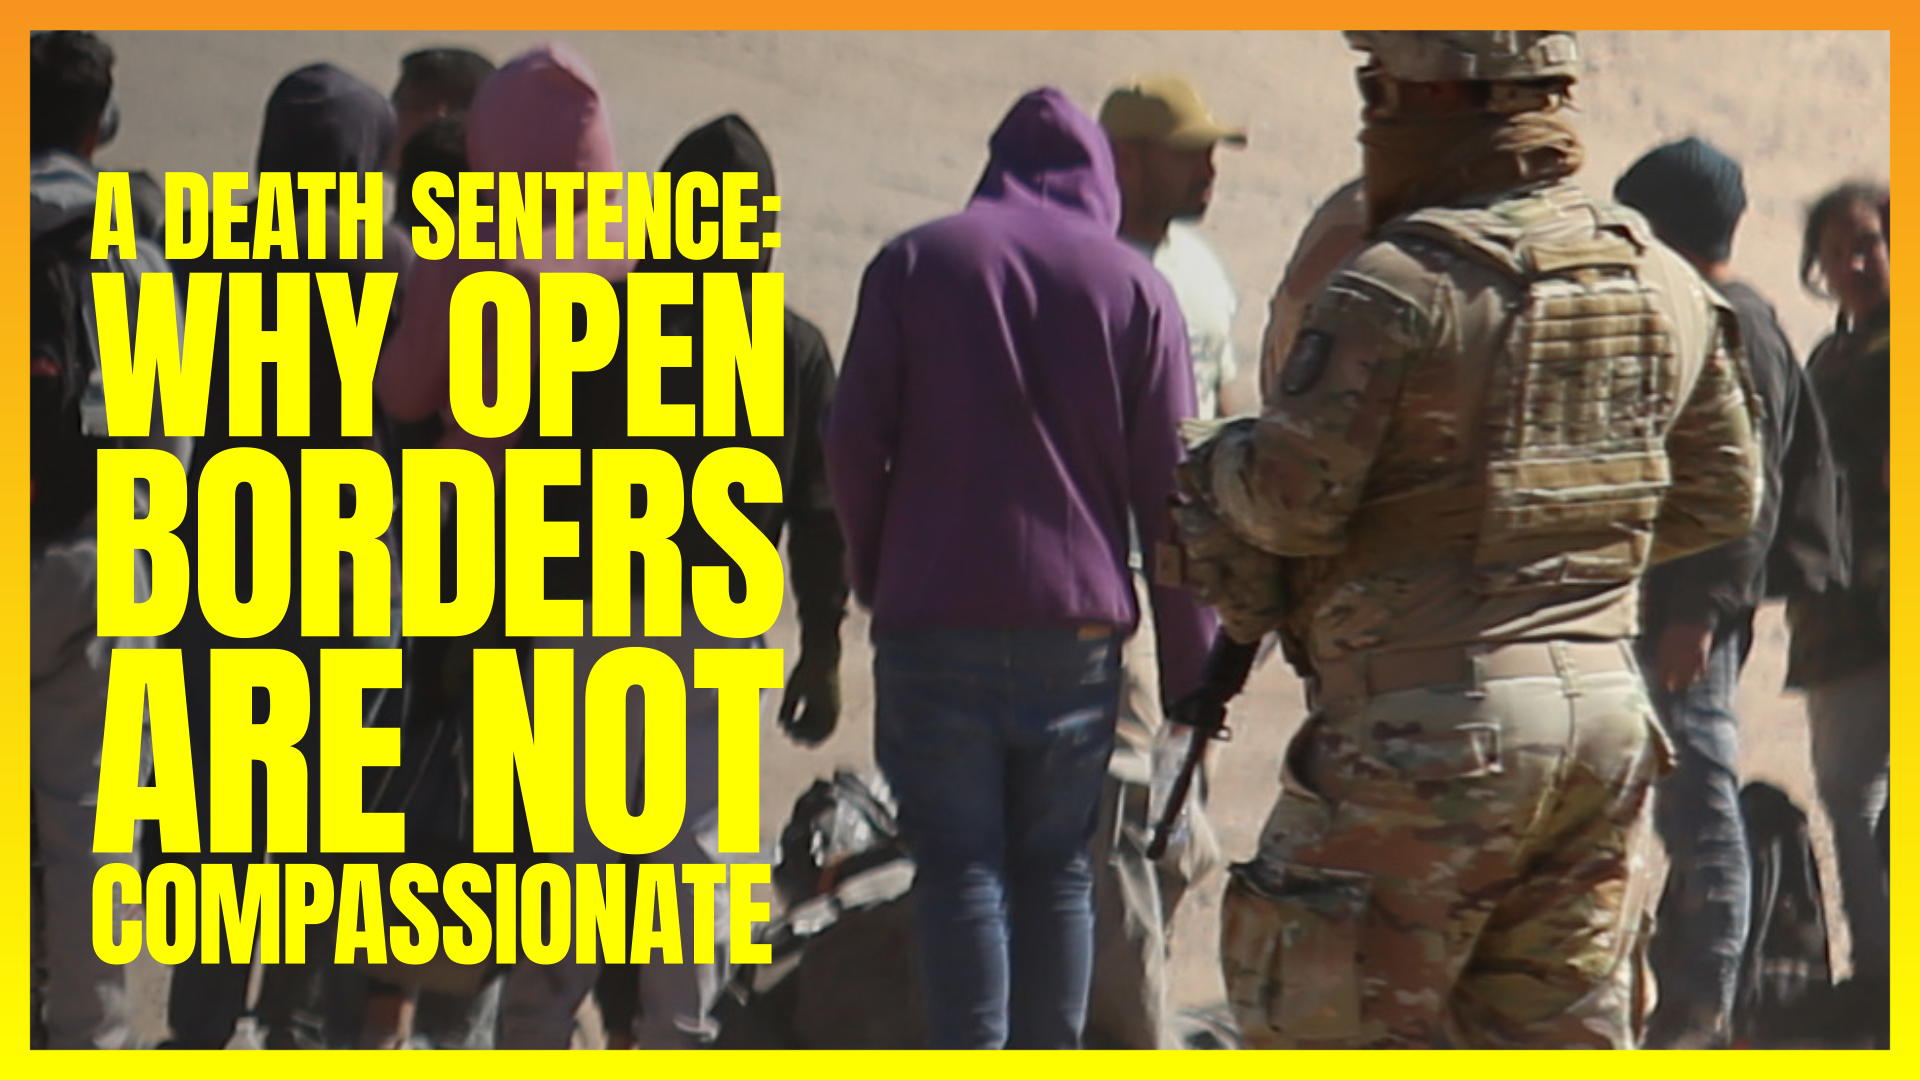 A Death Sentence: Why Open Borders Are Not Compassionate